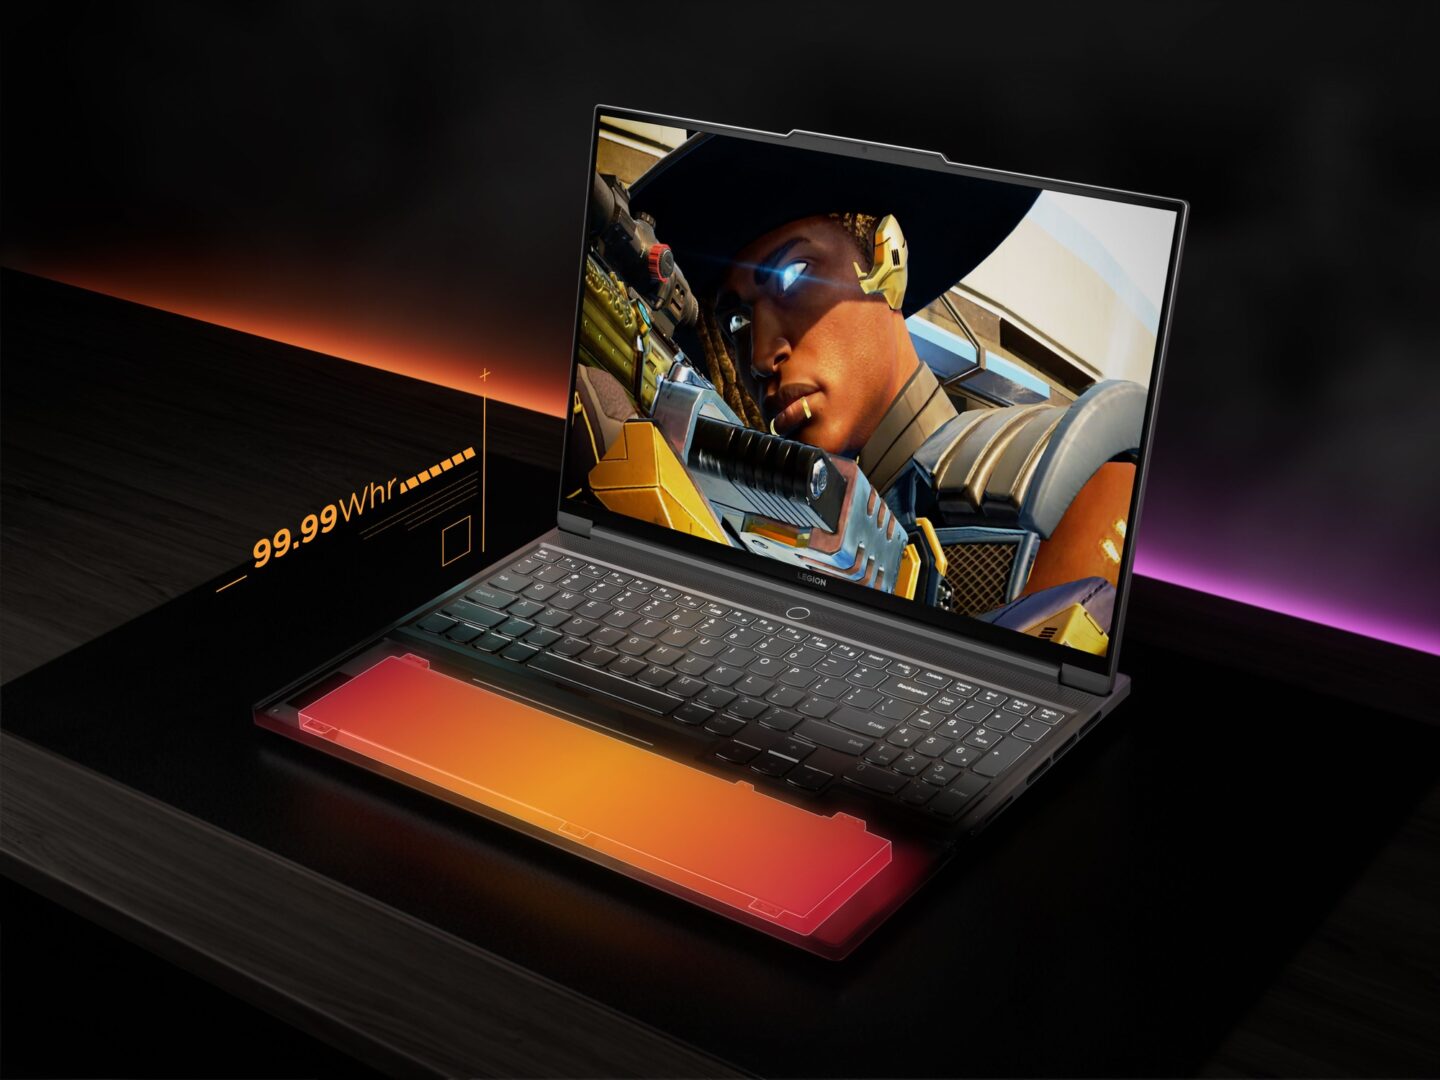 Lenovo has introduced powerful gaming laptops from the Legion brand